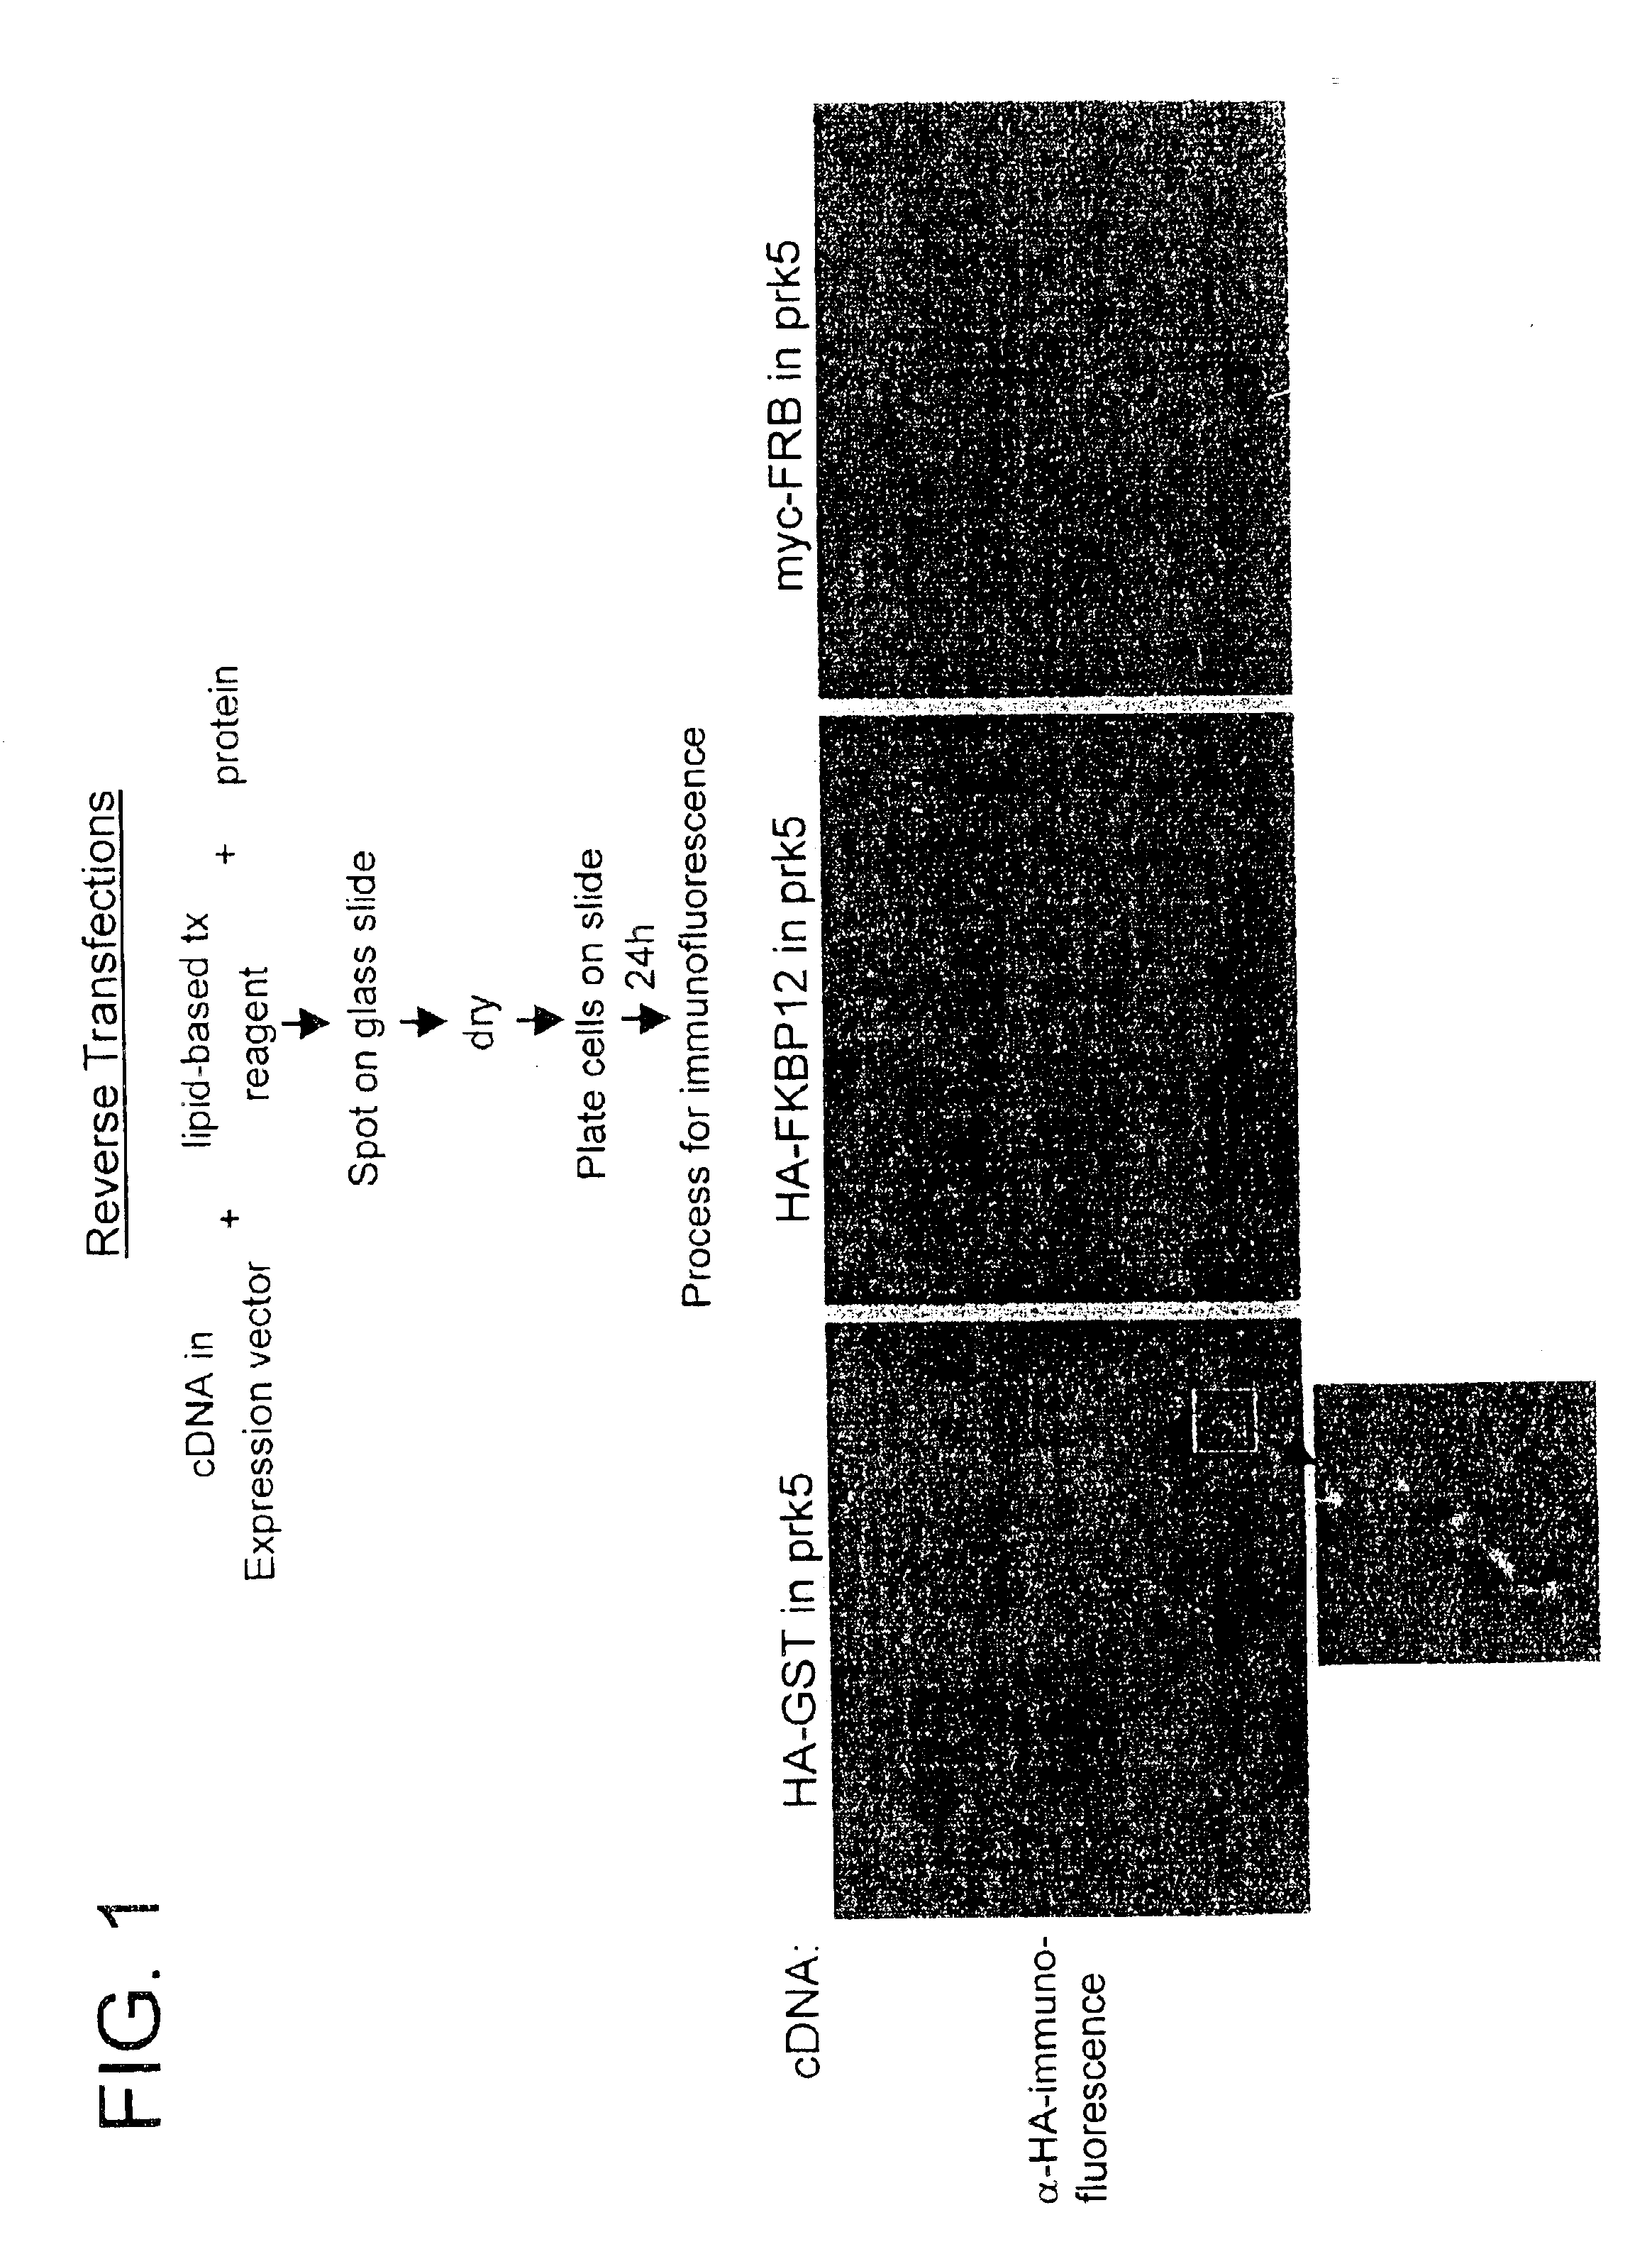 Transfection method and uses related thereto